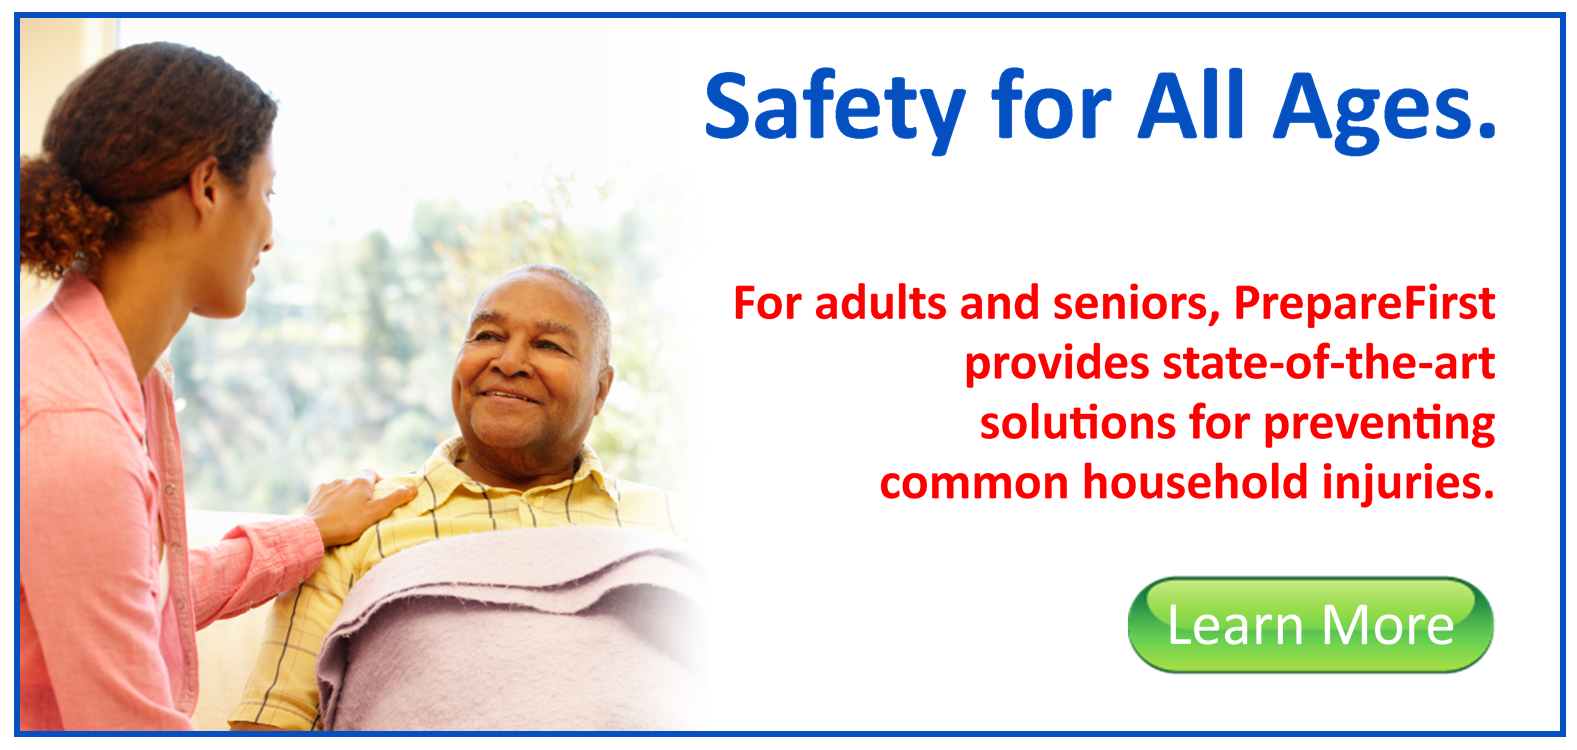 Click Here for ADULT & SENIOR SAFETY